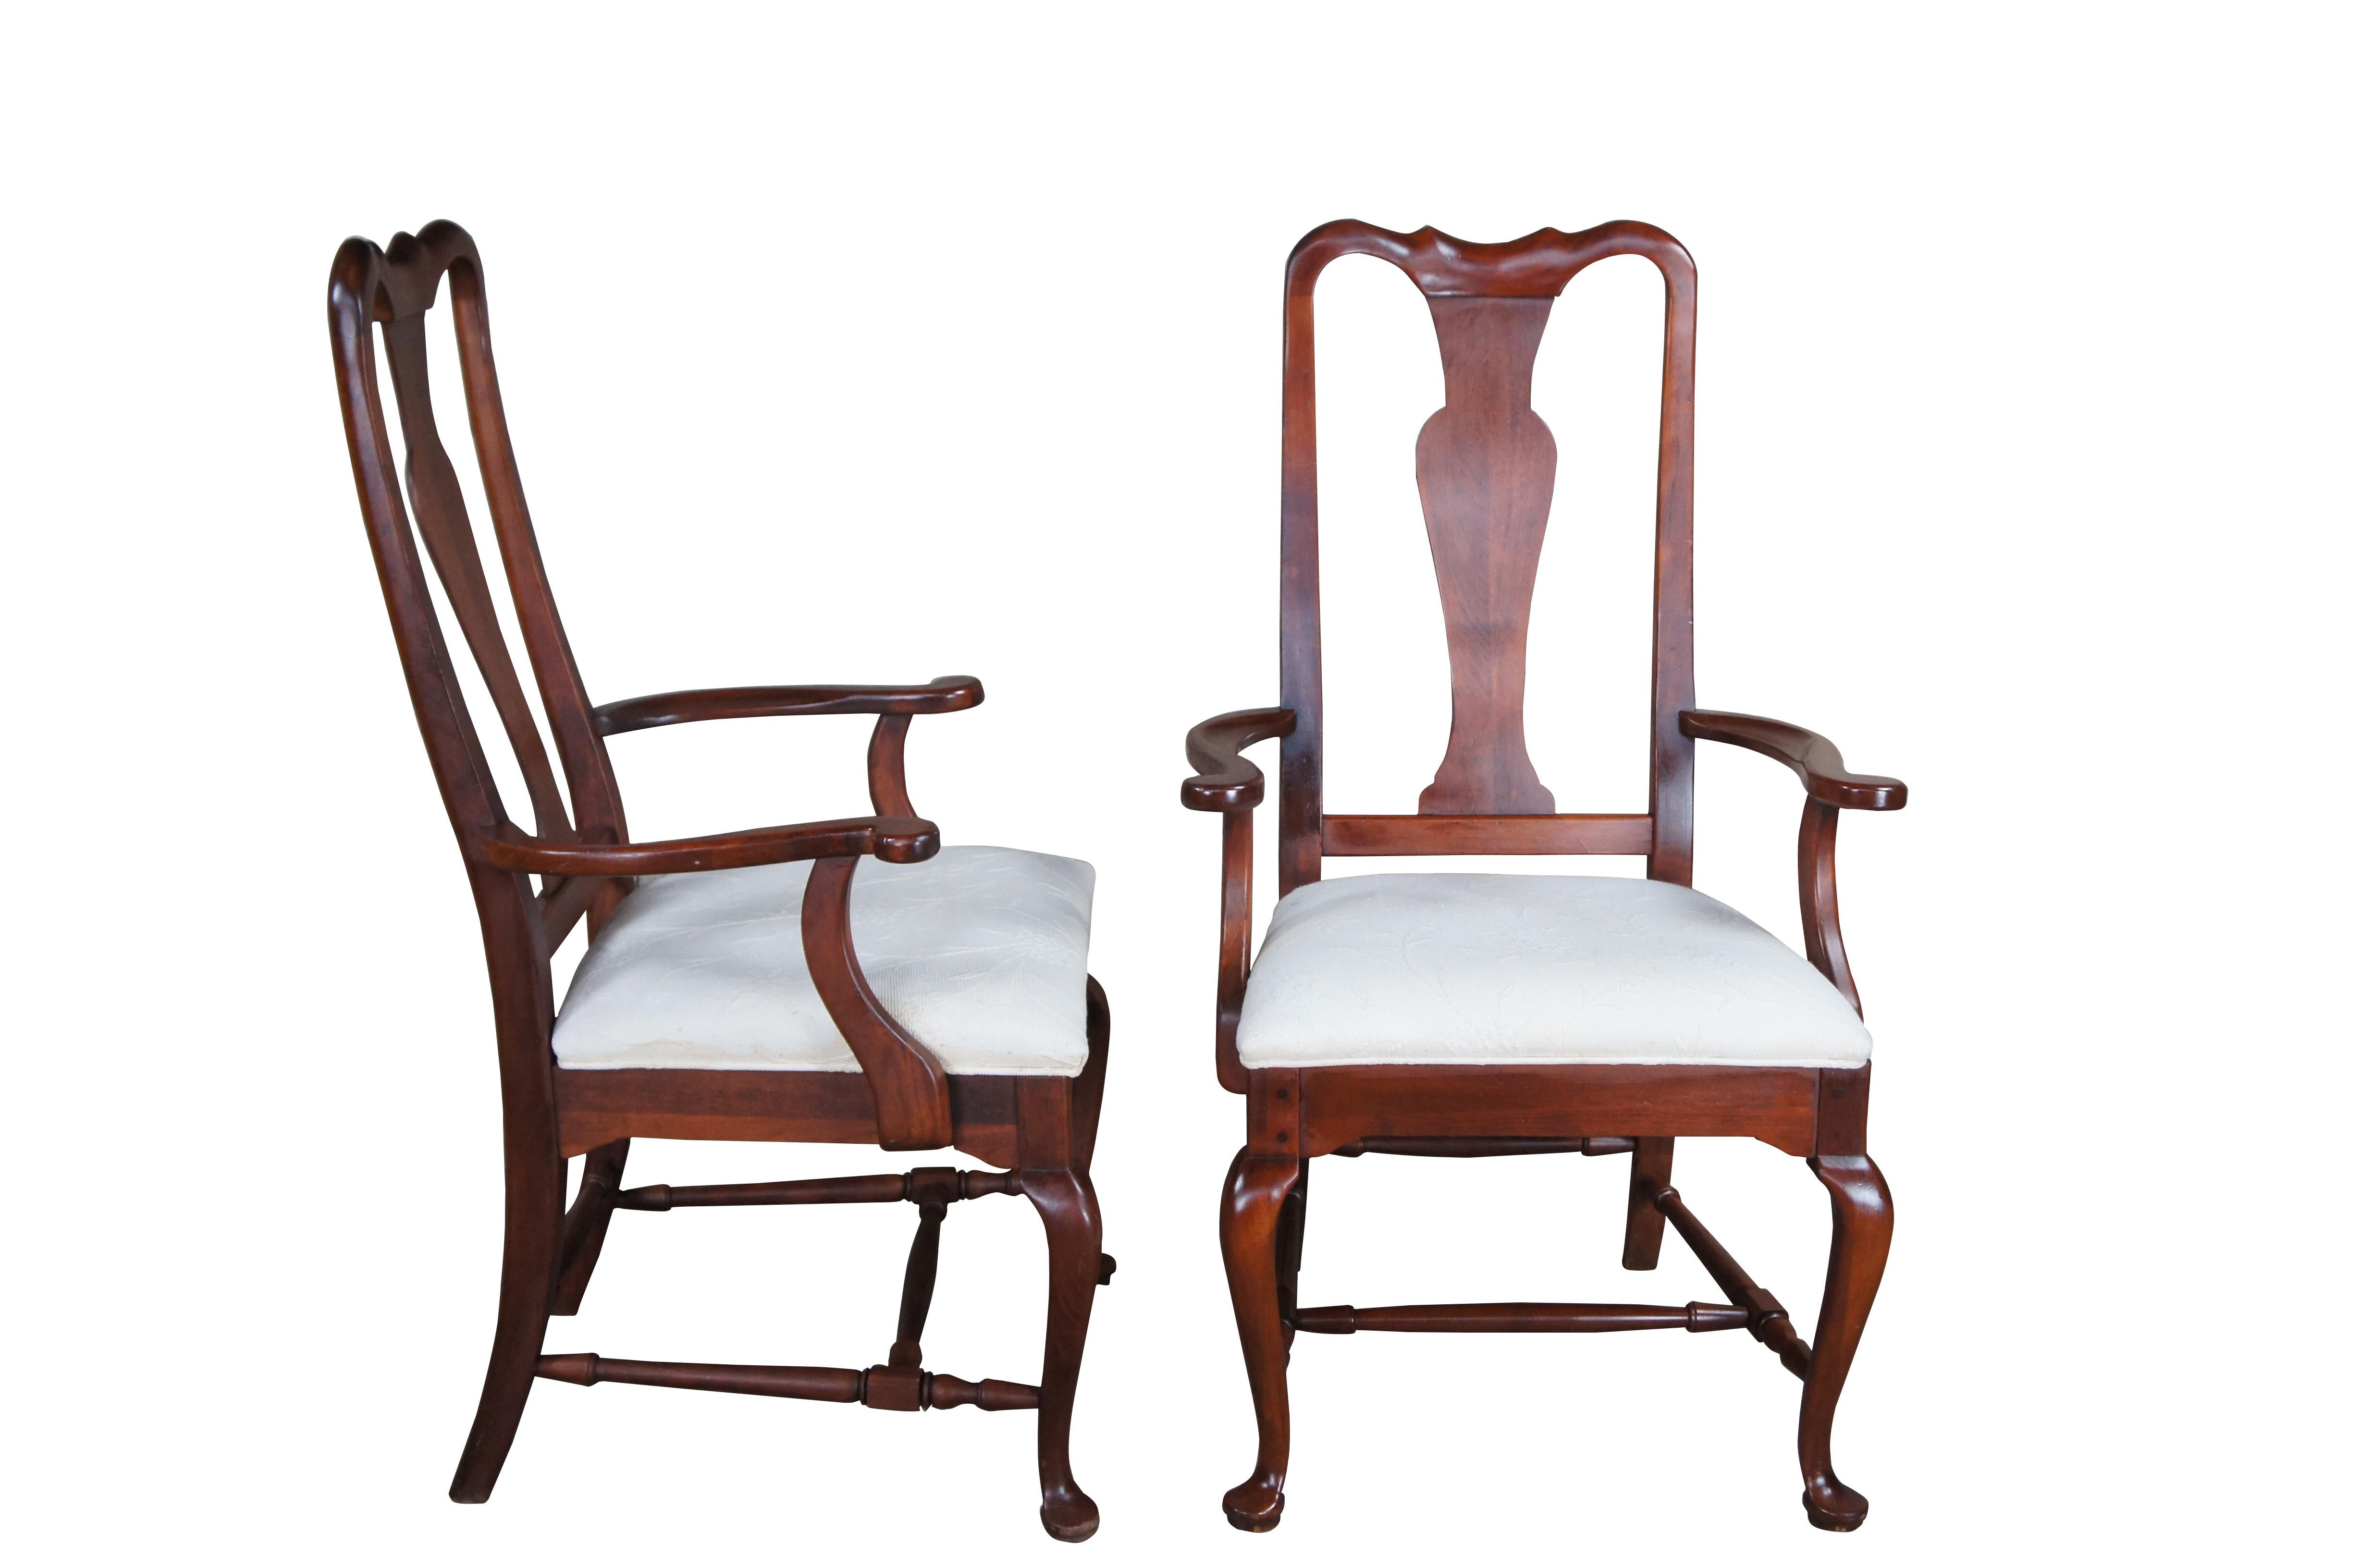 Vintage Lexington Furniture Bob Timberlake dining arm chairs. Made of solid cherry featuring Queen Anne styling with slat back and floral cushions . All six are armchairs, 833-891

Dimensions:
24.5